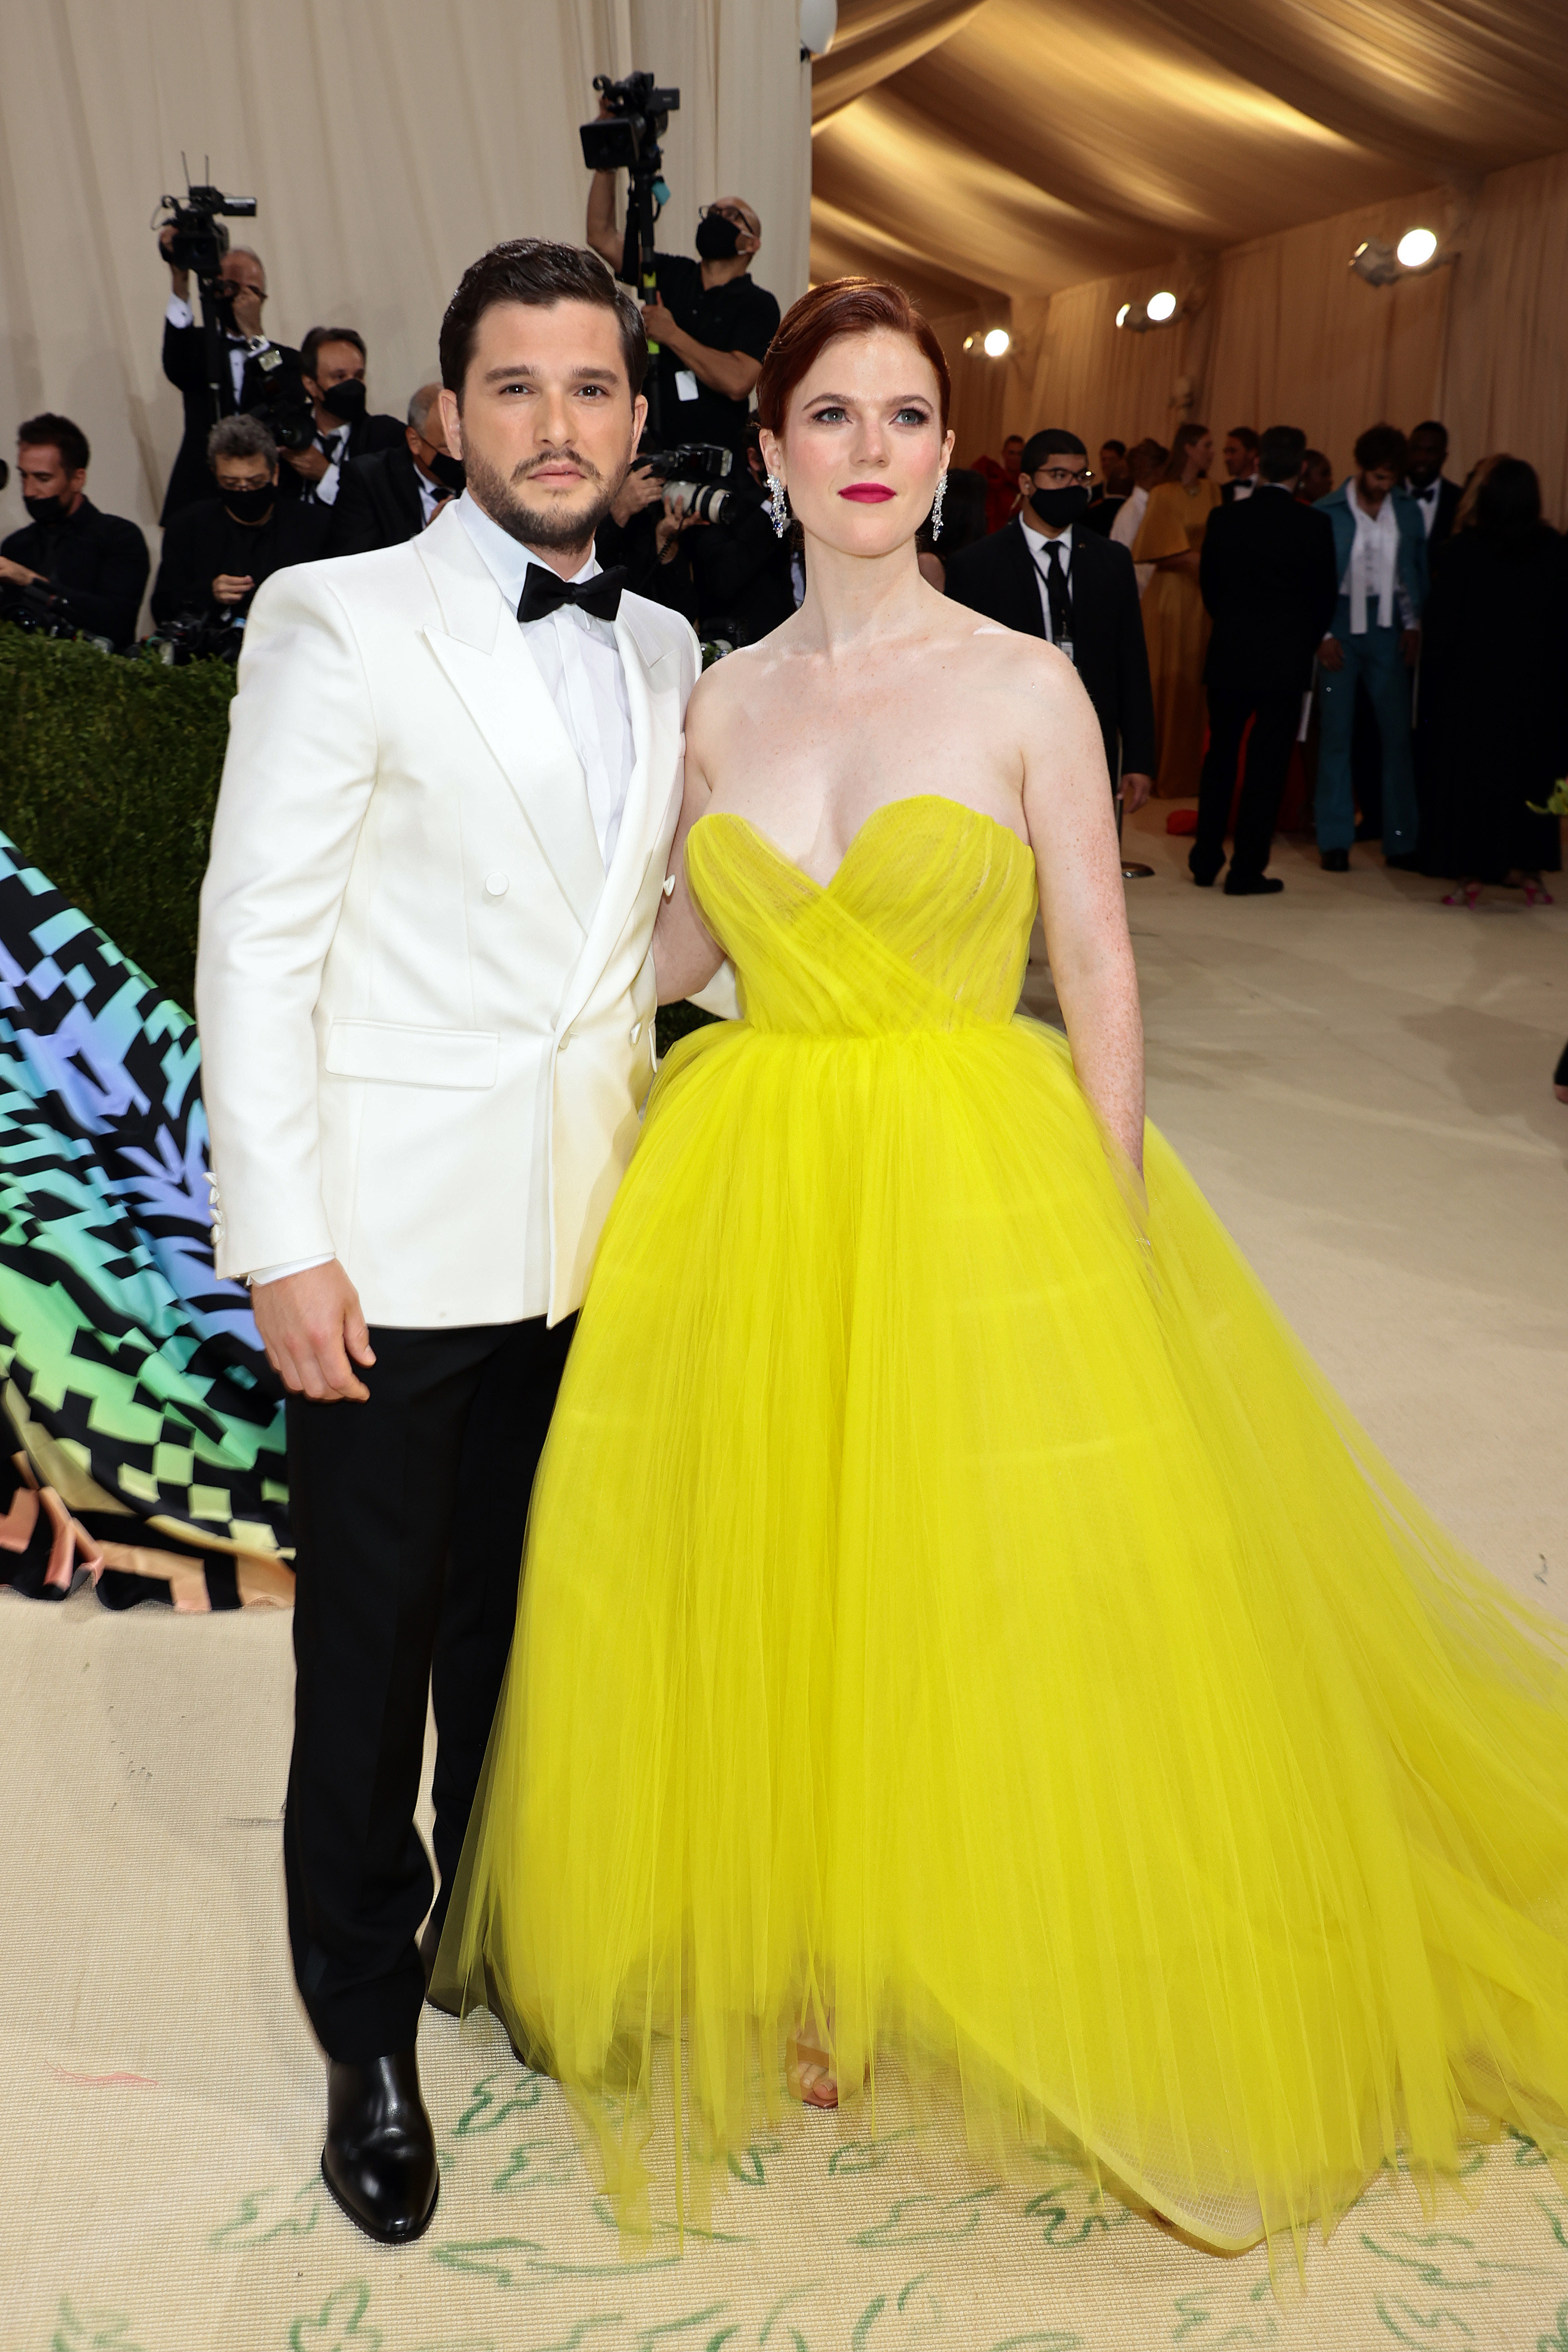 Kit Harington and Rose Leslie pose at The 2021 Met Gala in New York City on September 13, 2021